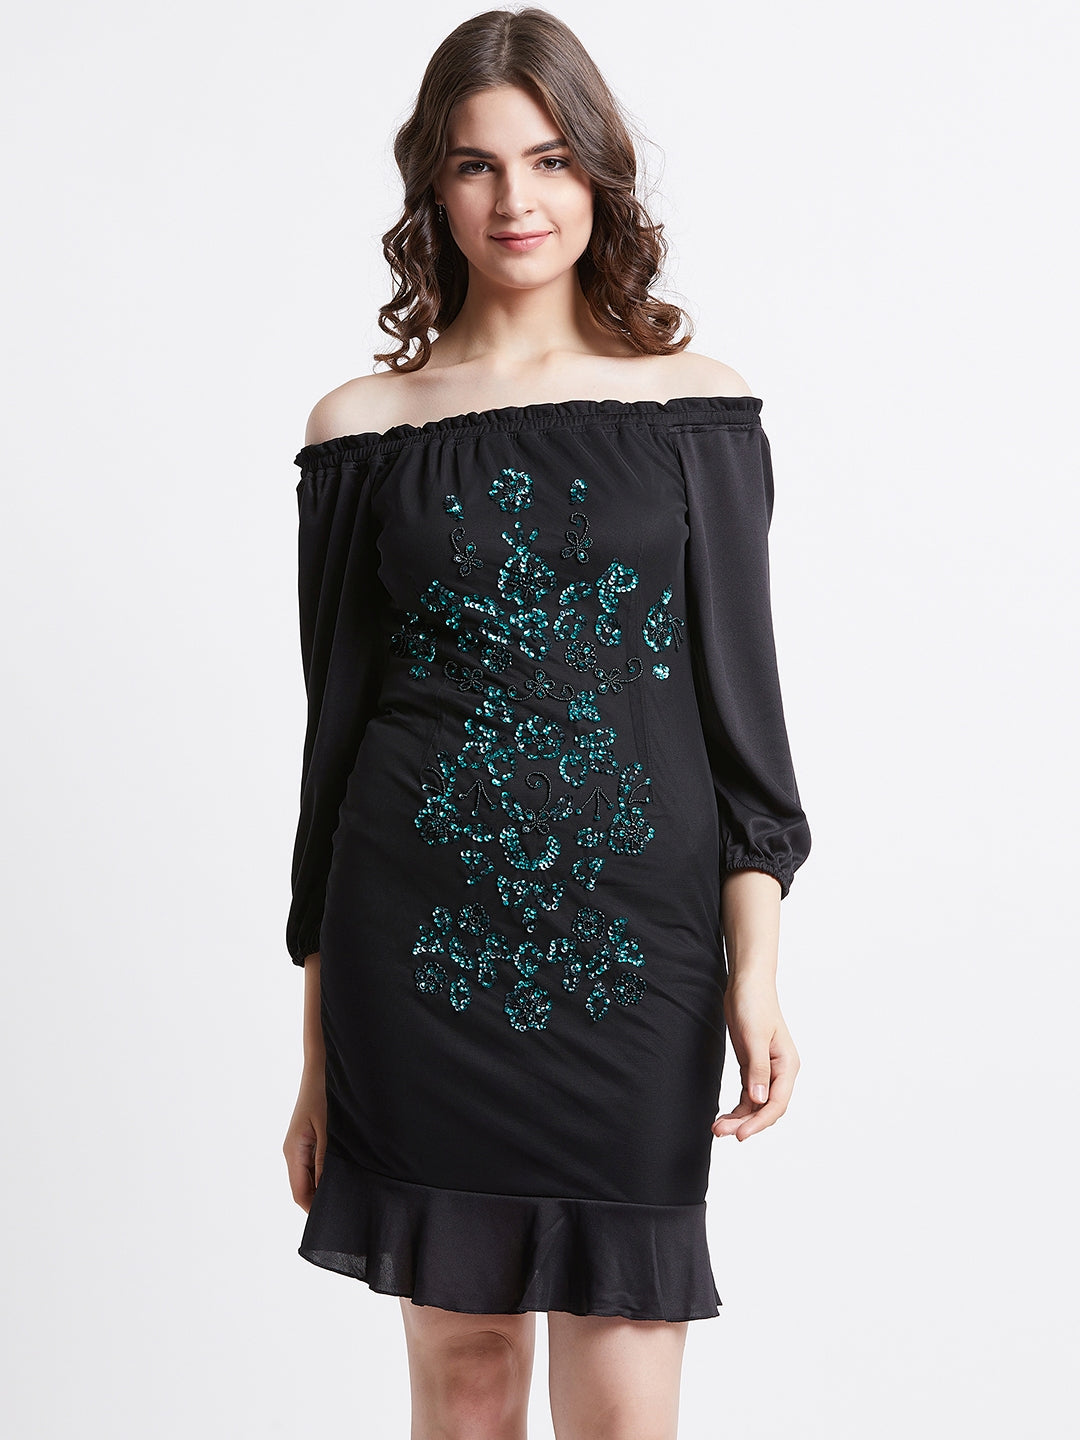 LY2 Polyester Black Off-Shoulder Three-Quarter Sleeves Sheath Party Dress For Women